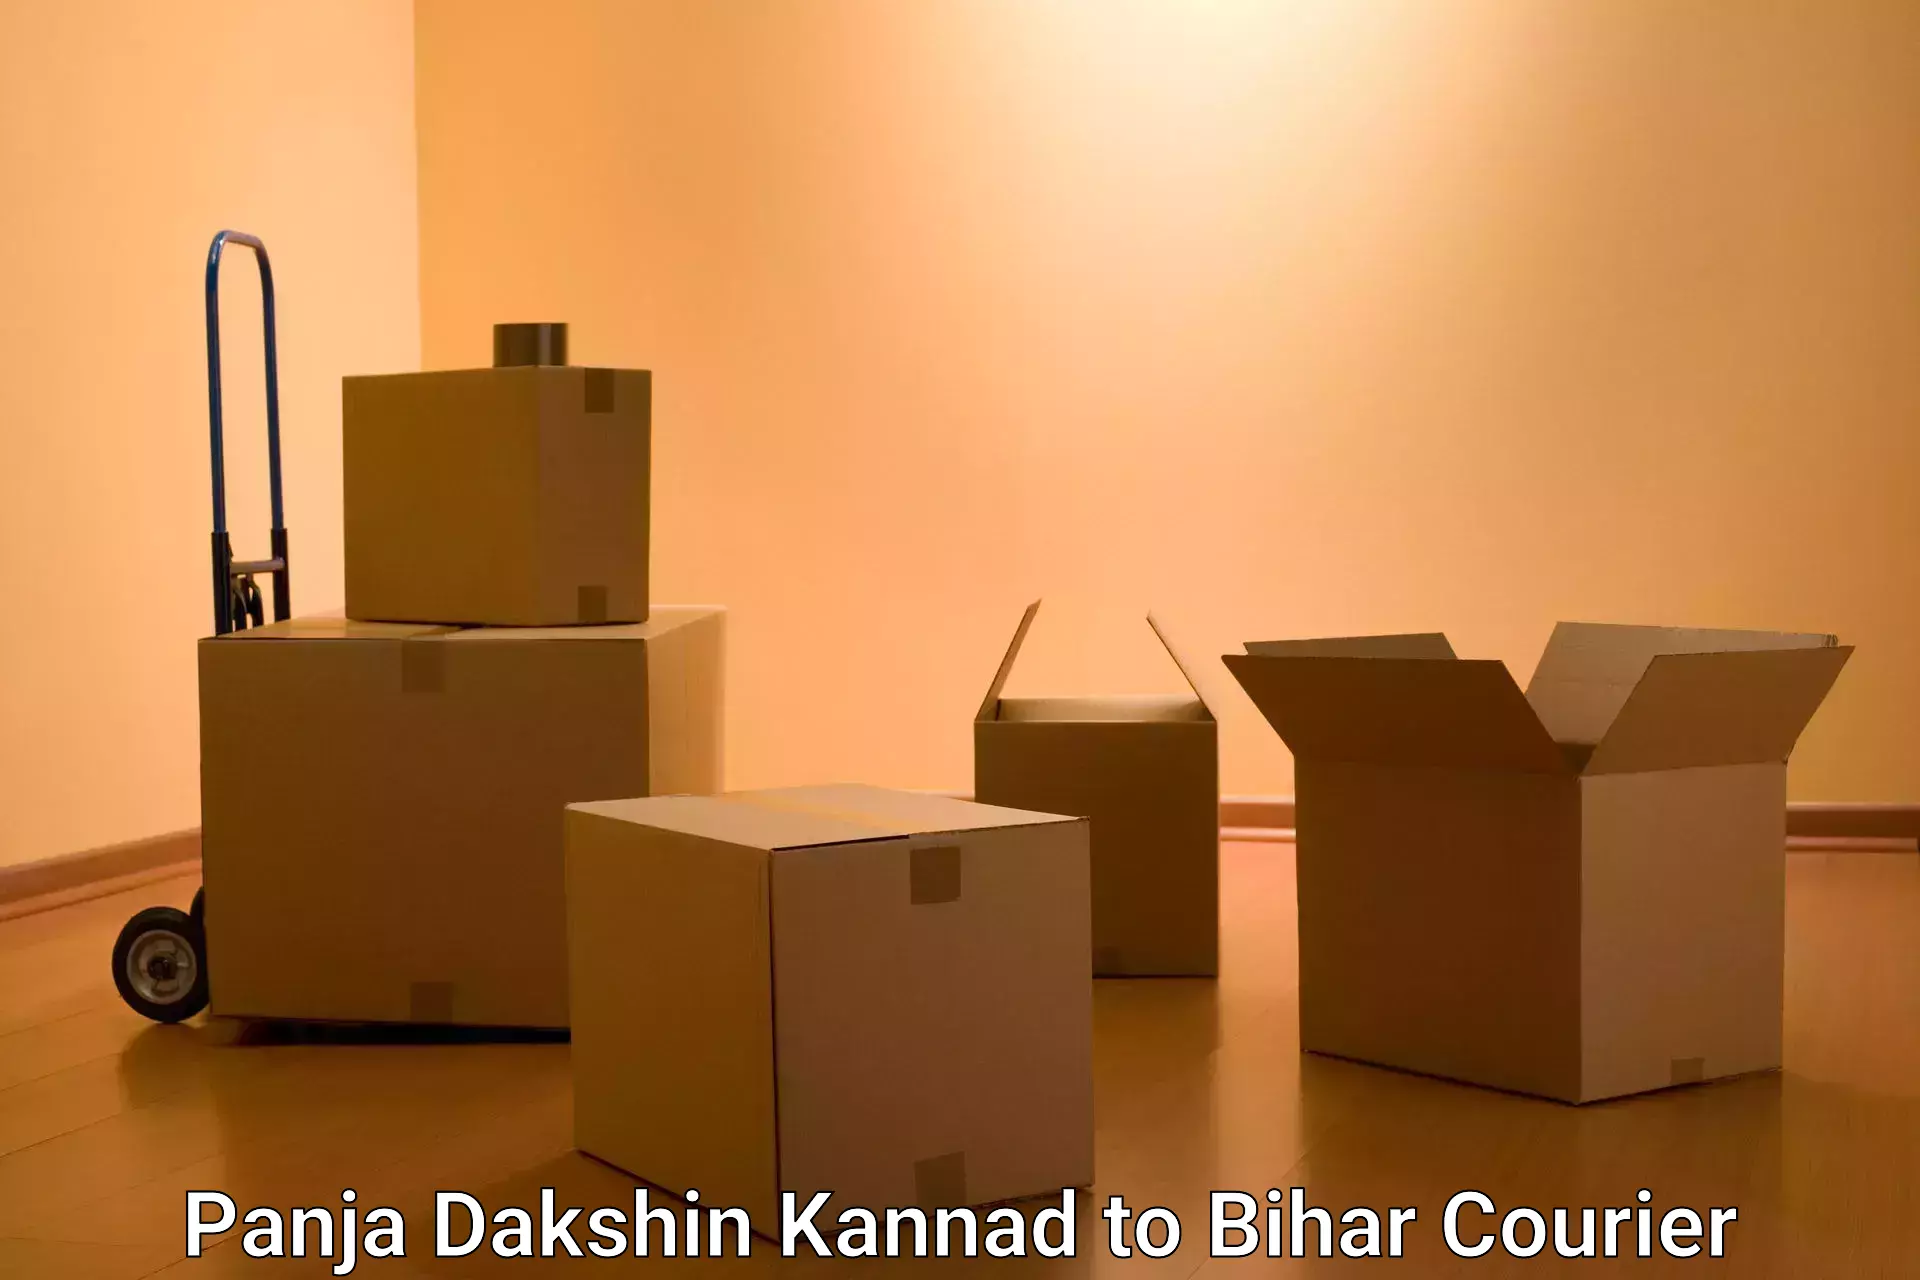 End-to-end delivery Panja Dakshin Kannad to Bihar